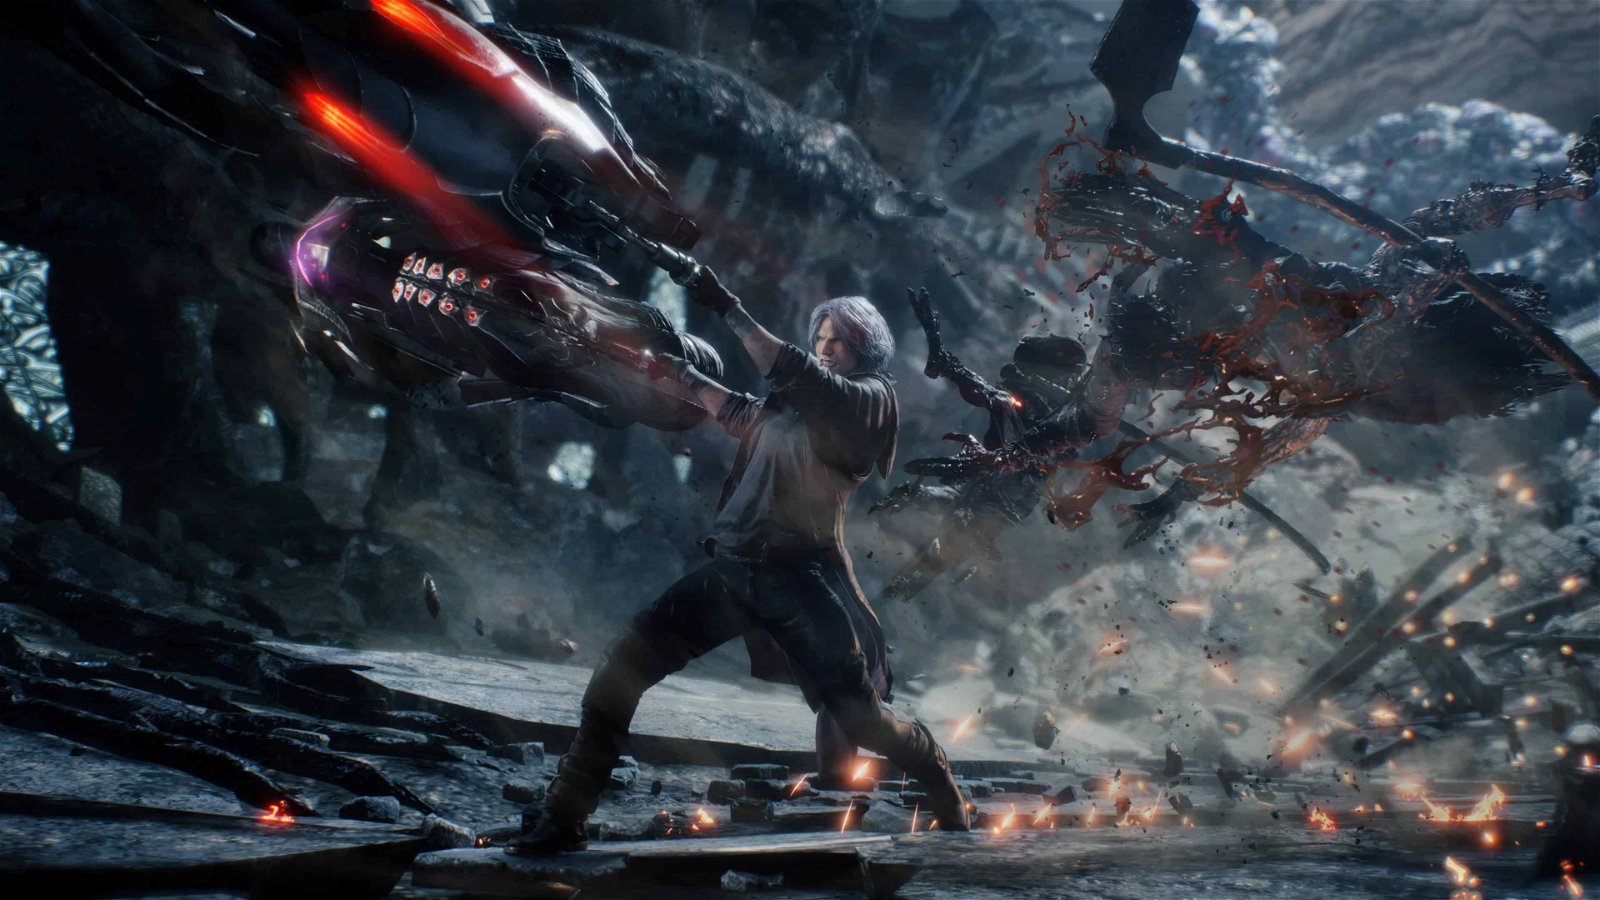 Tokyo Game Show 2018: Devil May Cry 5 Hands-On Preview (Embargo Is Sept 22 At 8 A.m Pst)